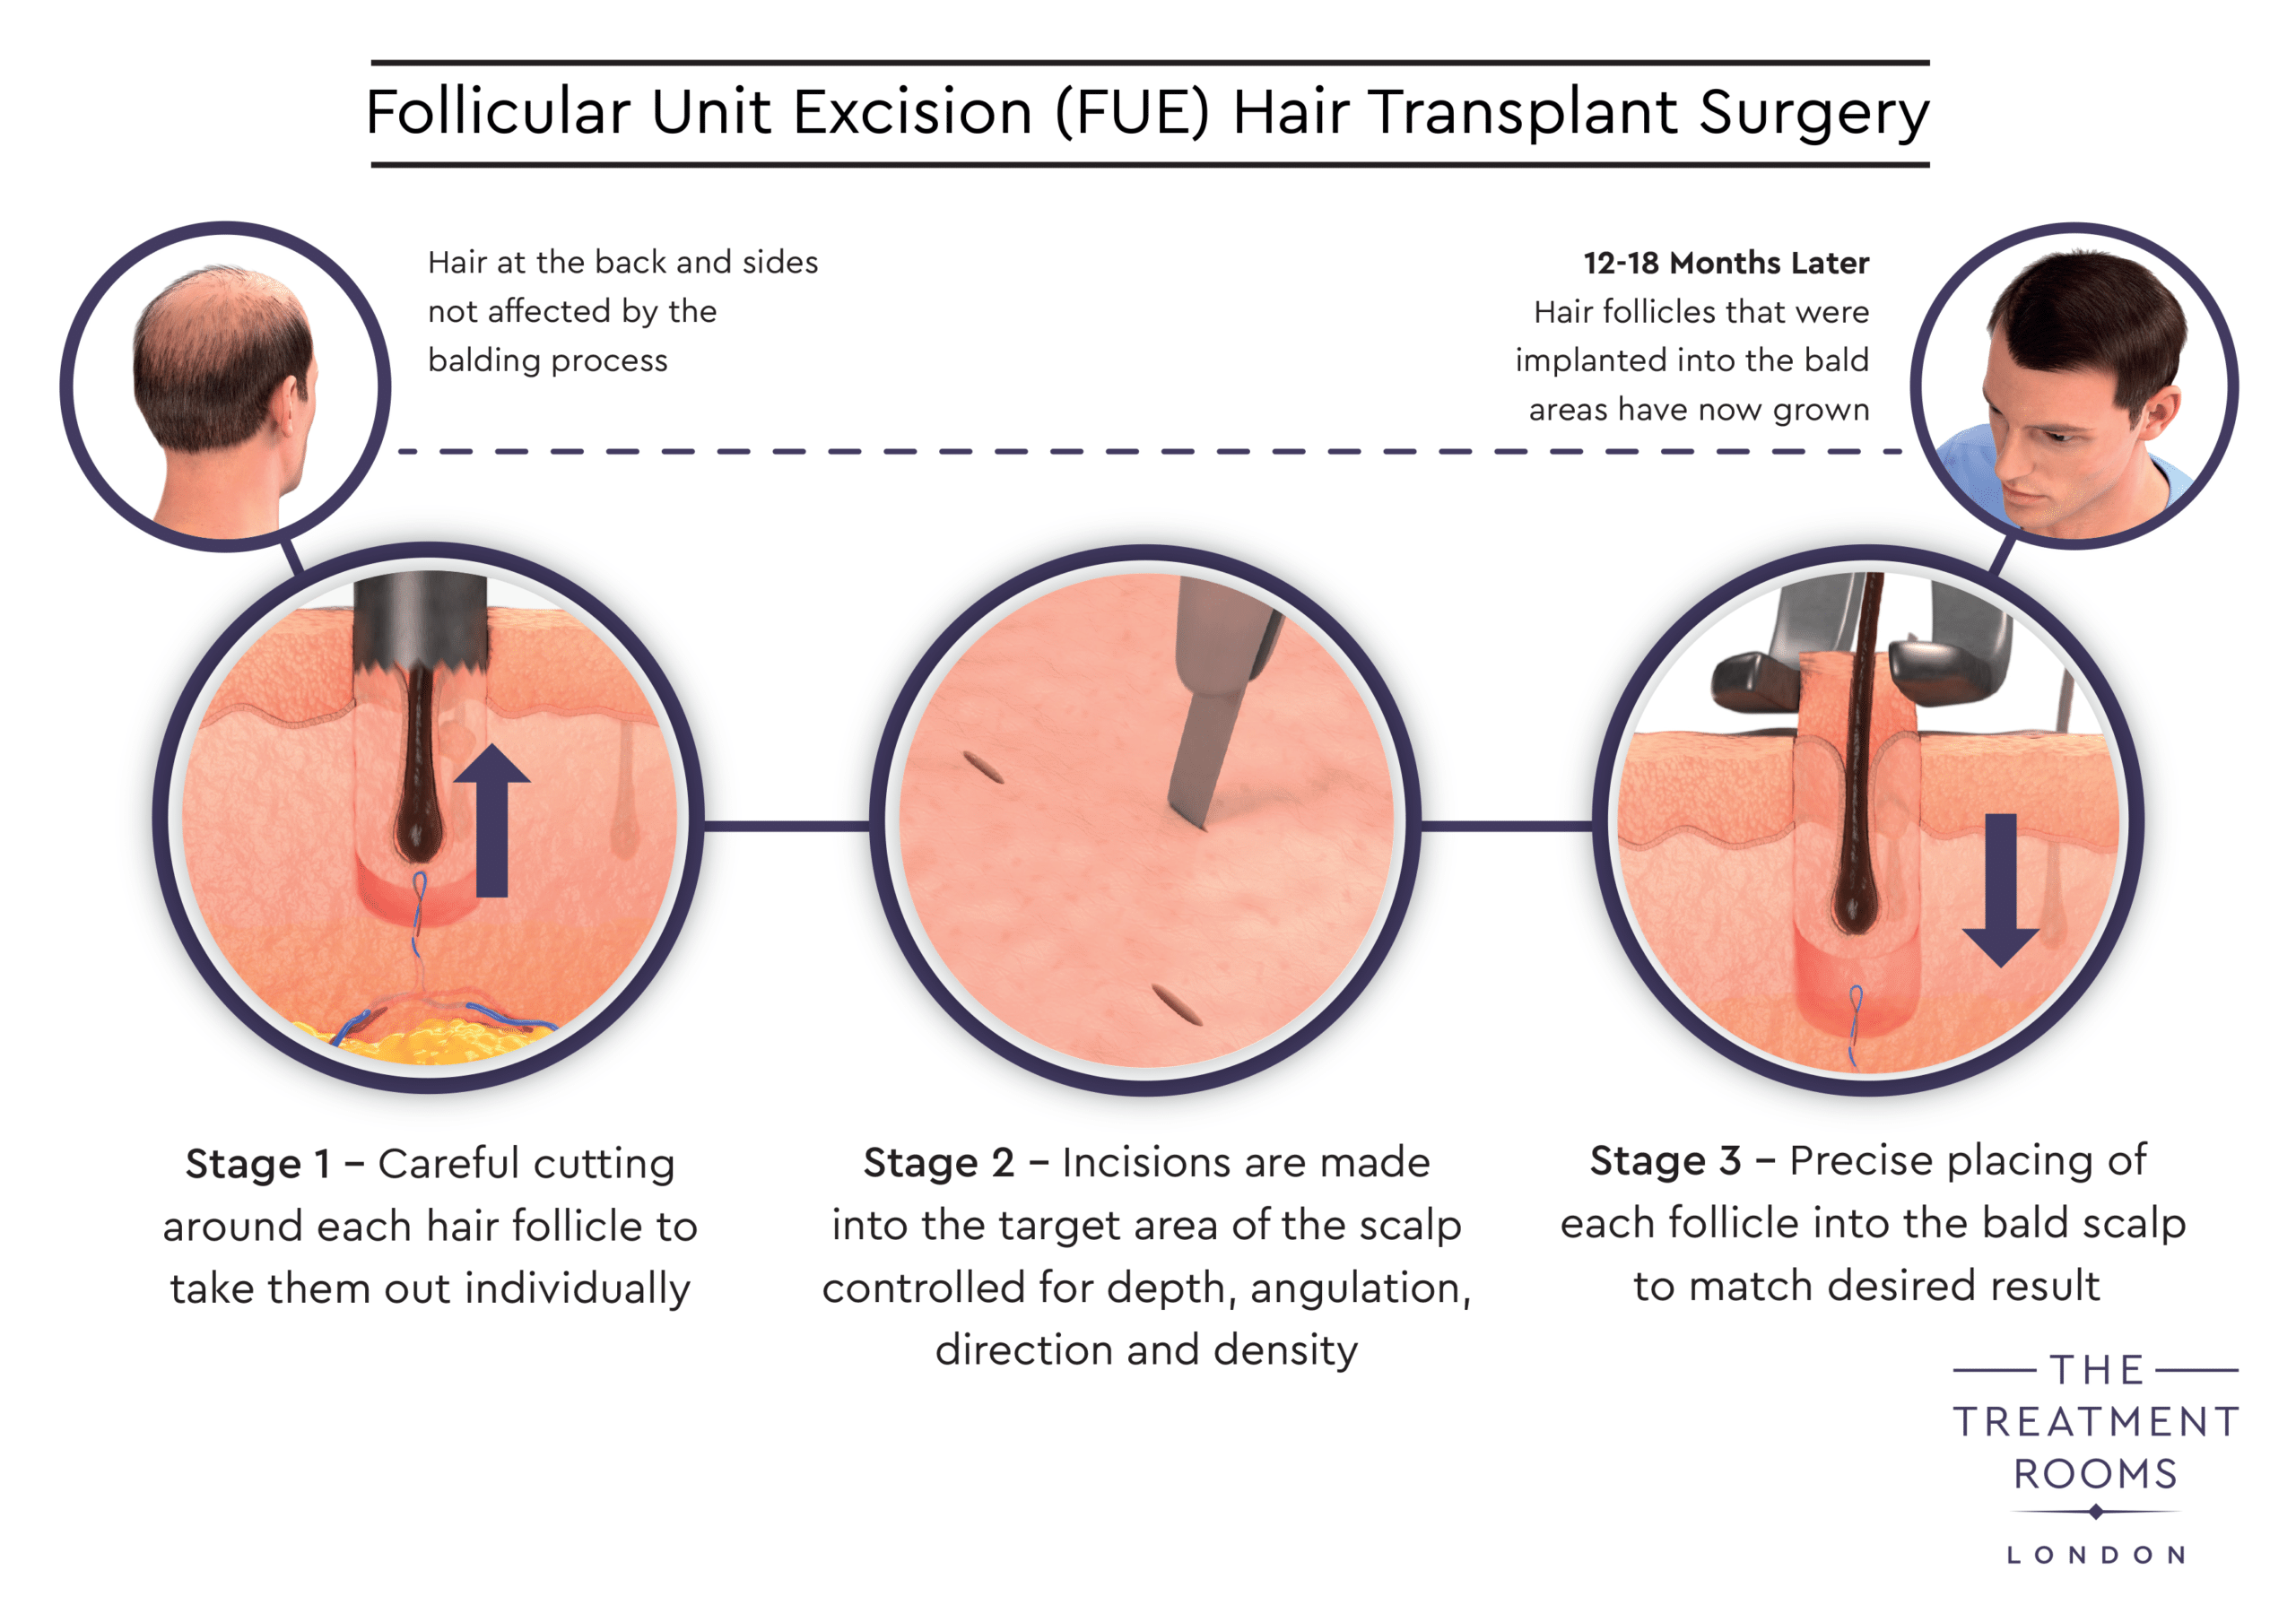 When Can I Rub My Head After a Hair Transplant?